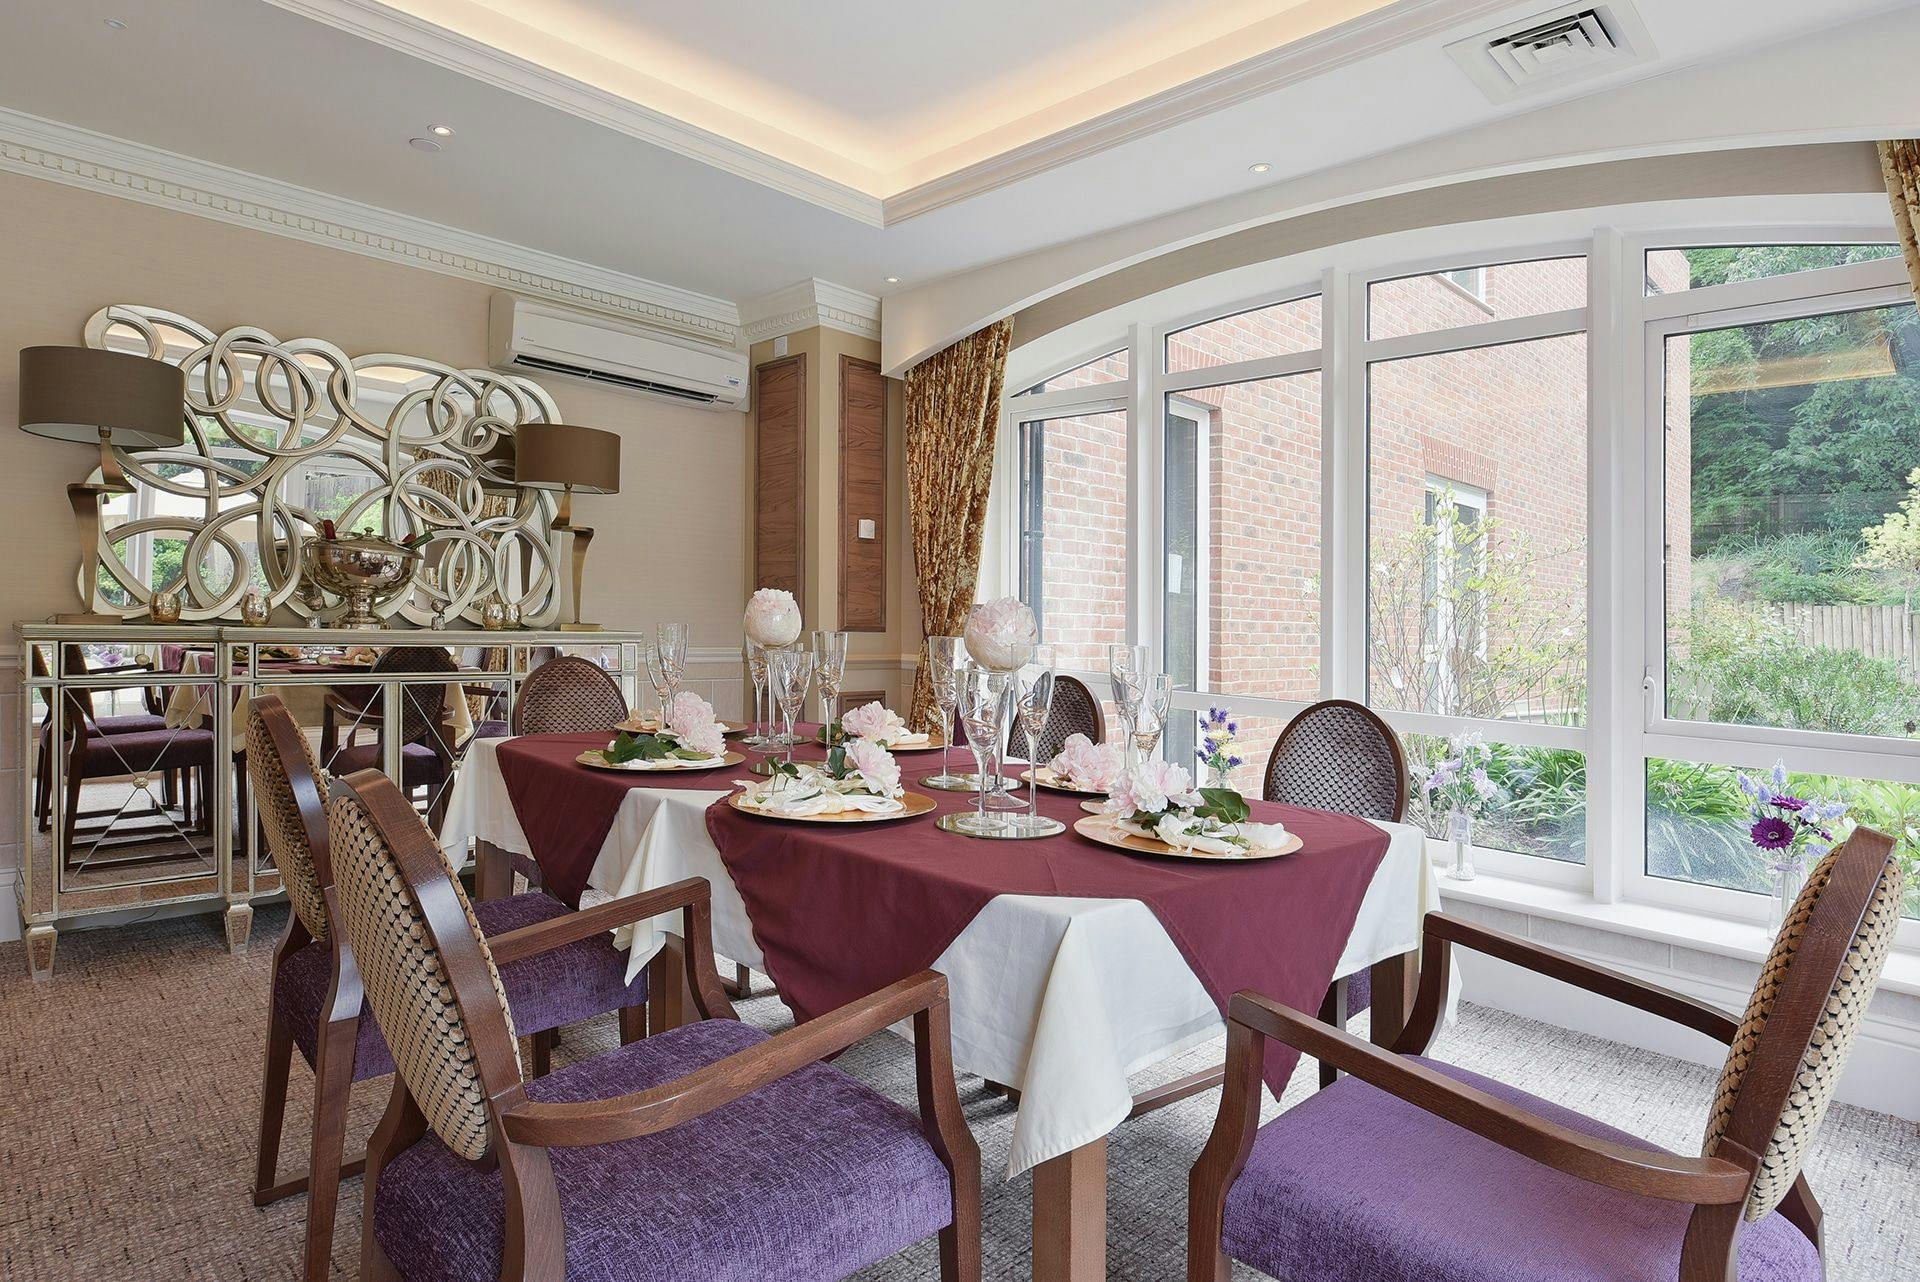 Dining area of Ascot Grange care home in Ascot, Berkshire